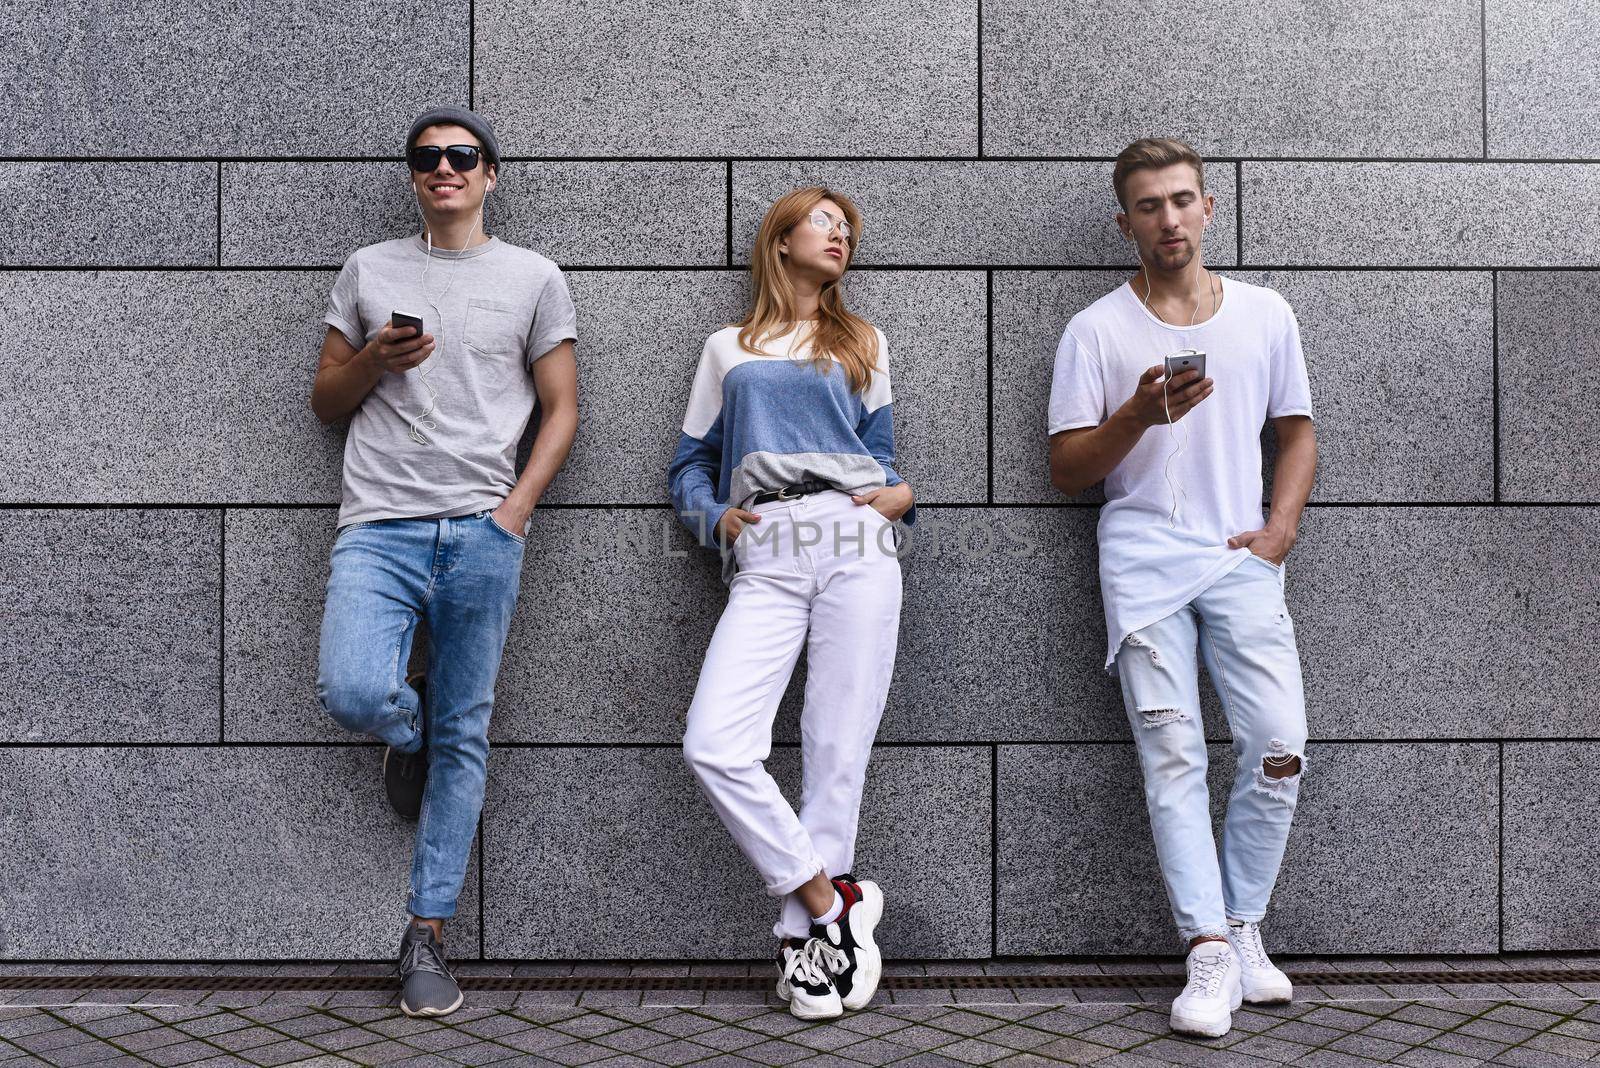 Fashion portrait of Three best friends posing at street, wearing stylish outfit and jeans against gray wall